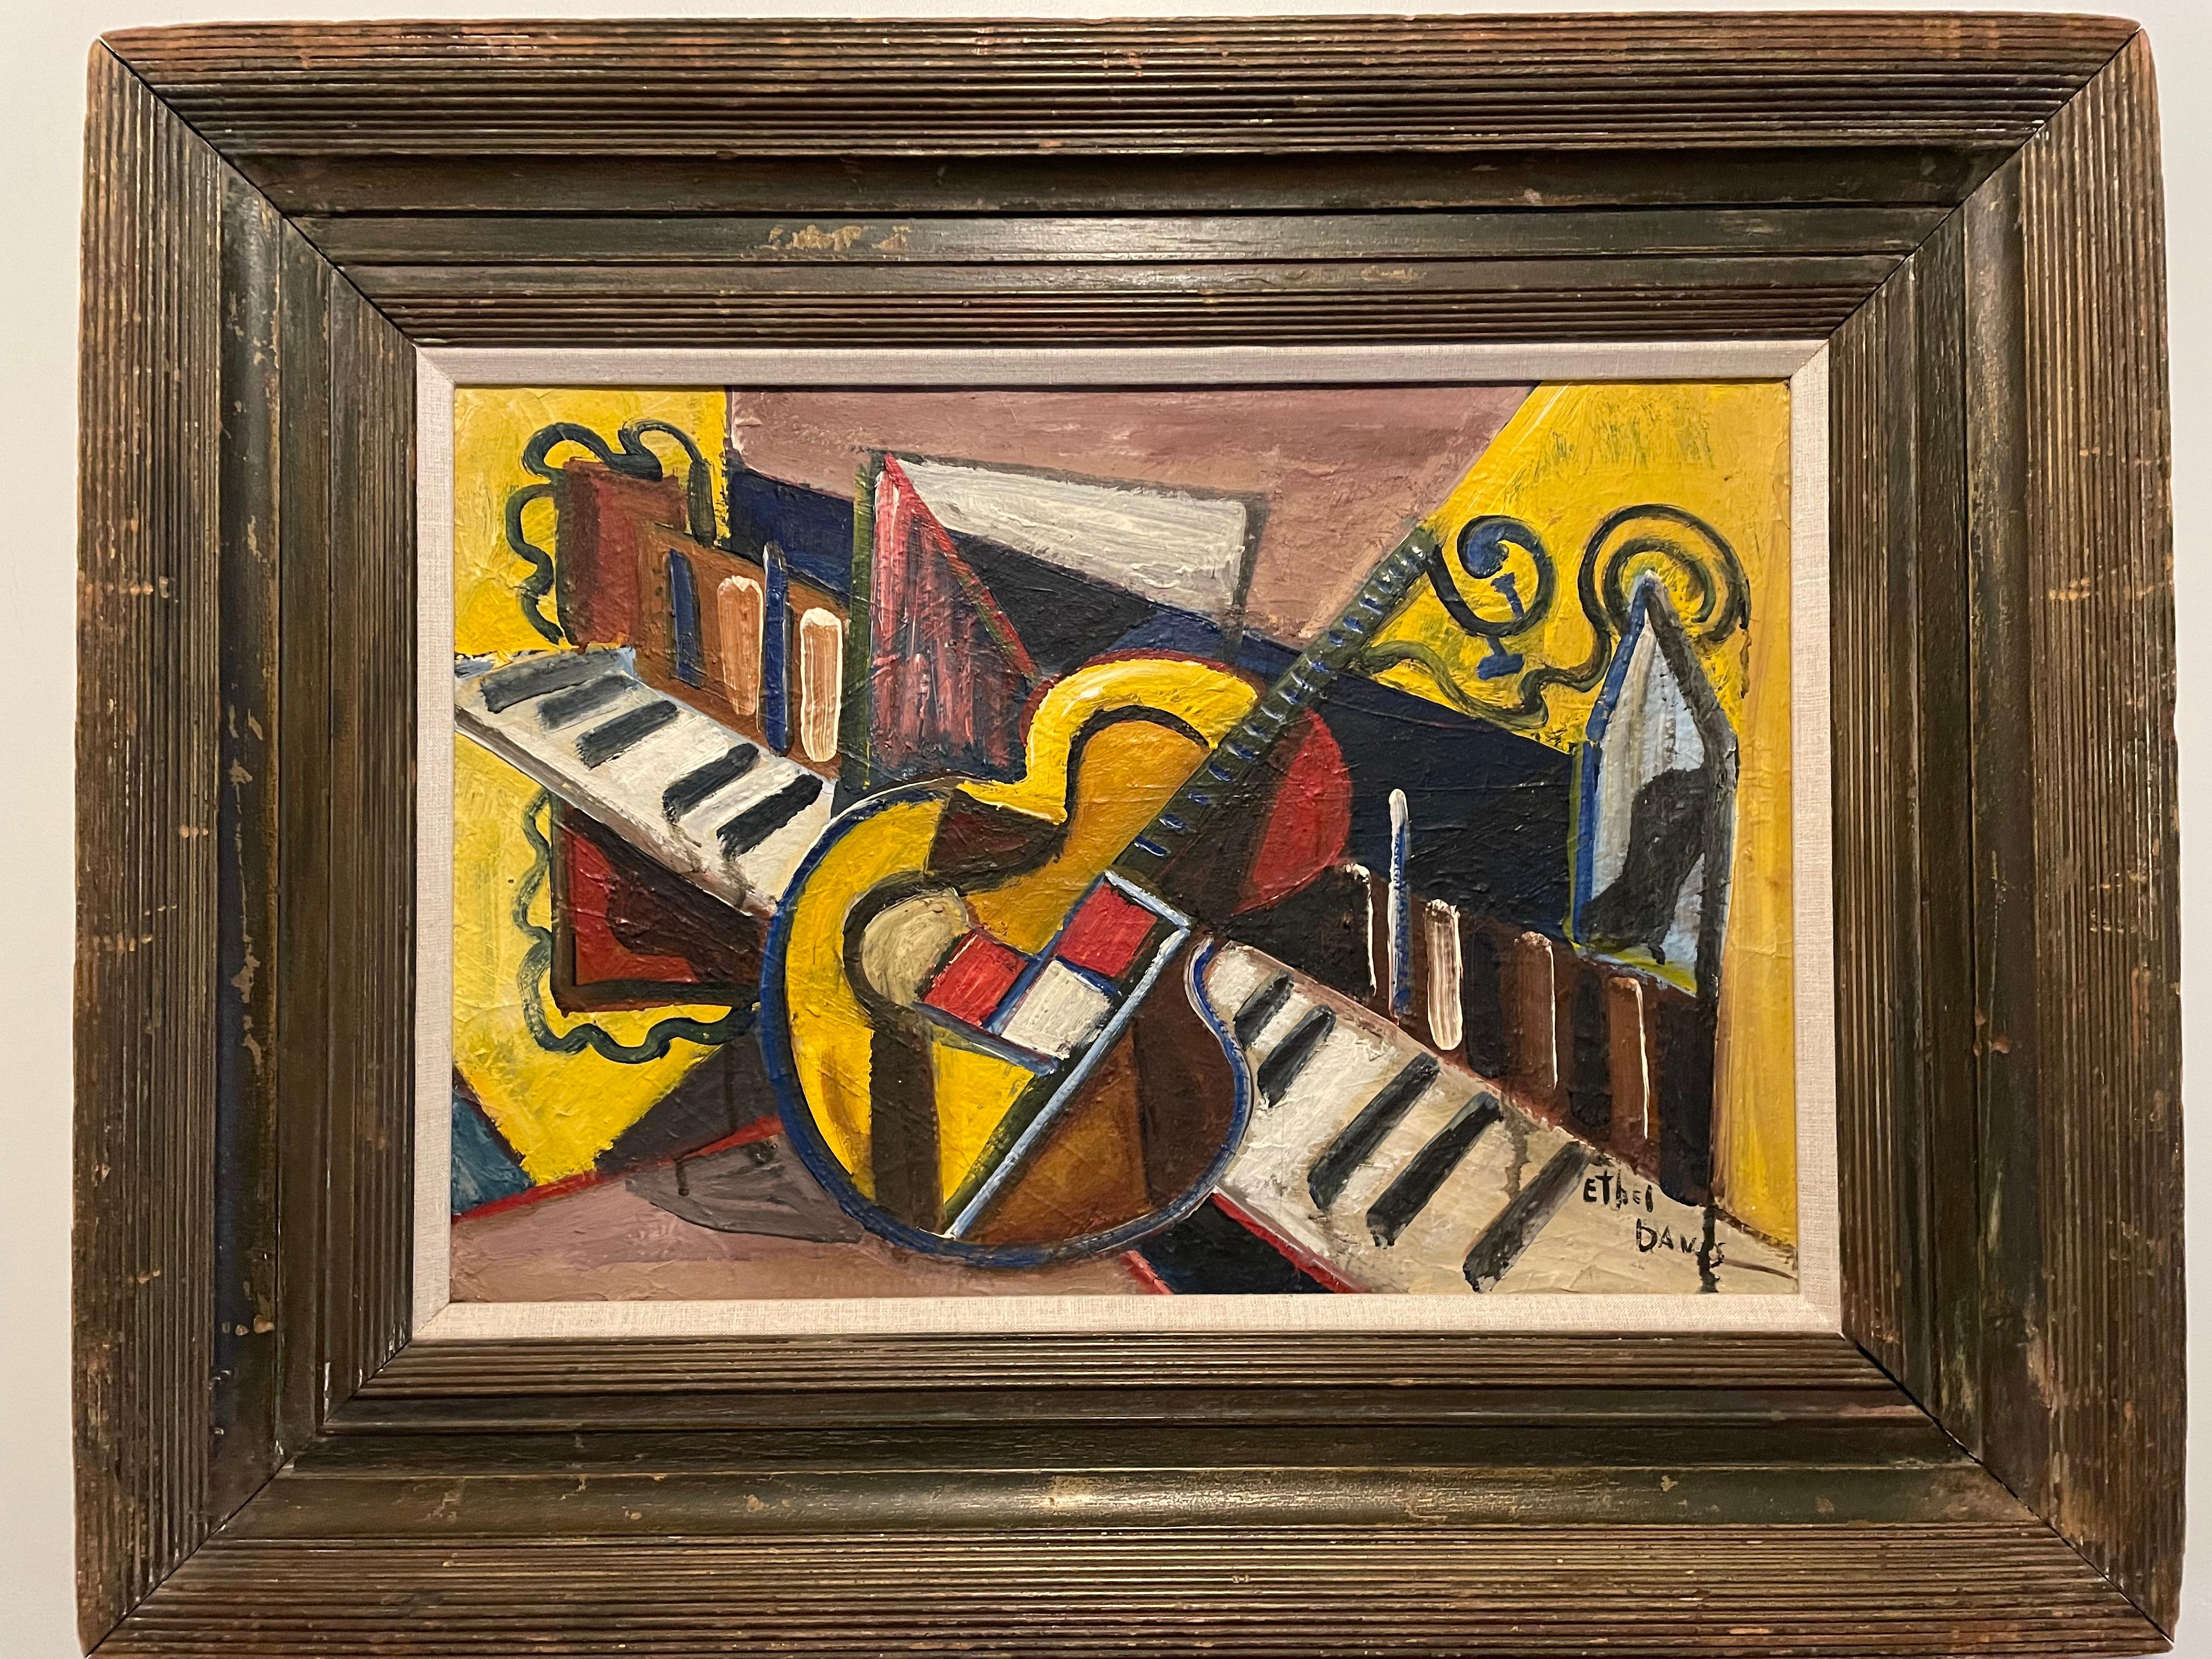 Ethel Rosetta Davis Abstract Painting - Southern Modernist Abstract Musical Oil Painting by Ethel Davis, Alabama 1940